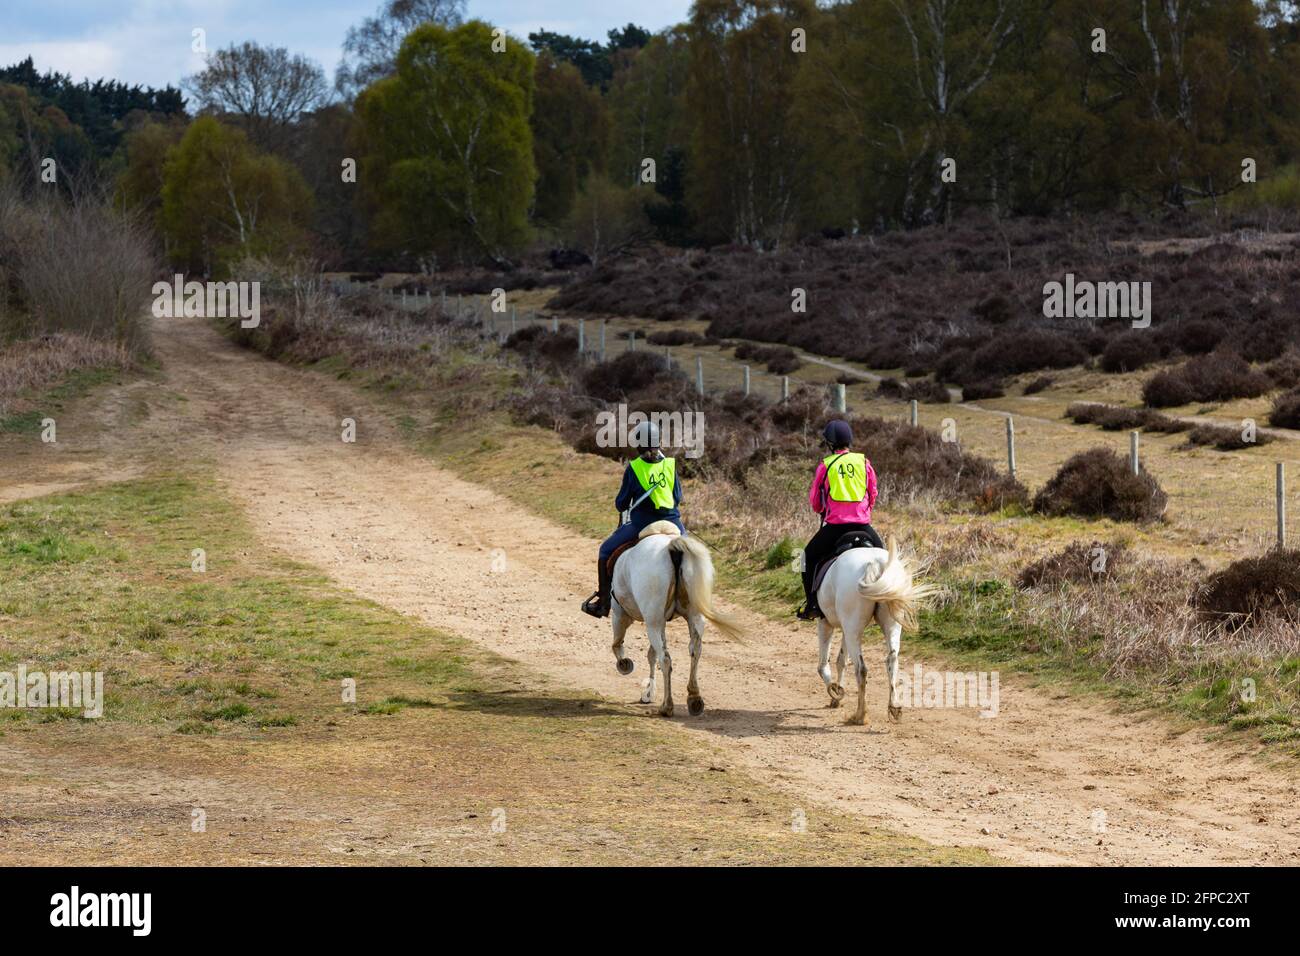 Woodbridge, Suffolk, UK May 01 2021: A cross country horse riding time trail event Stock Photo